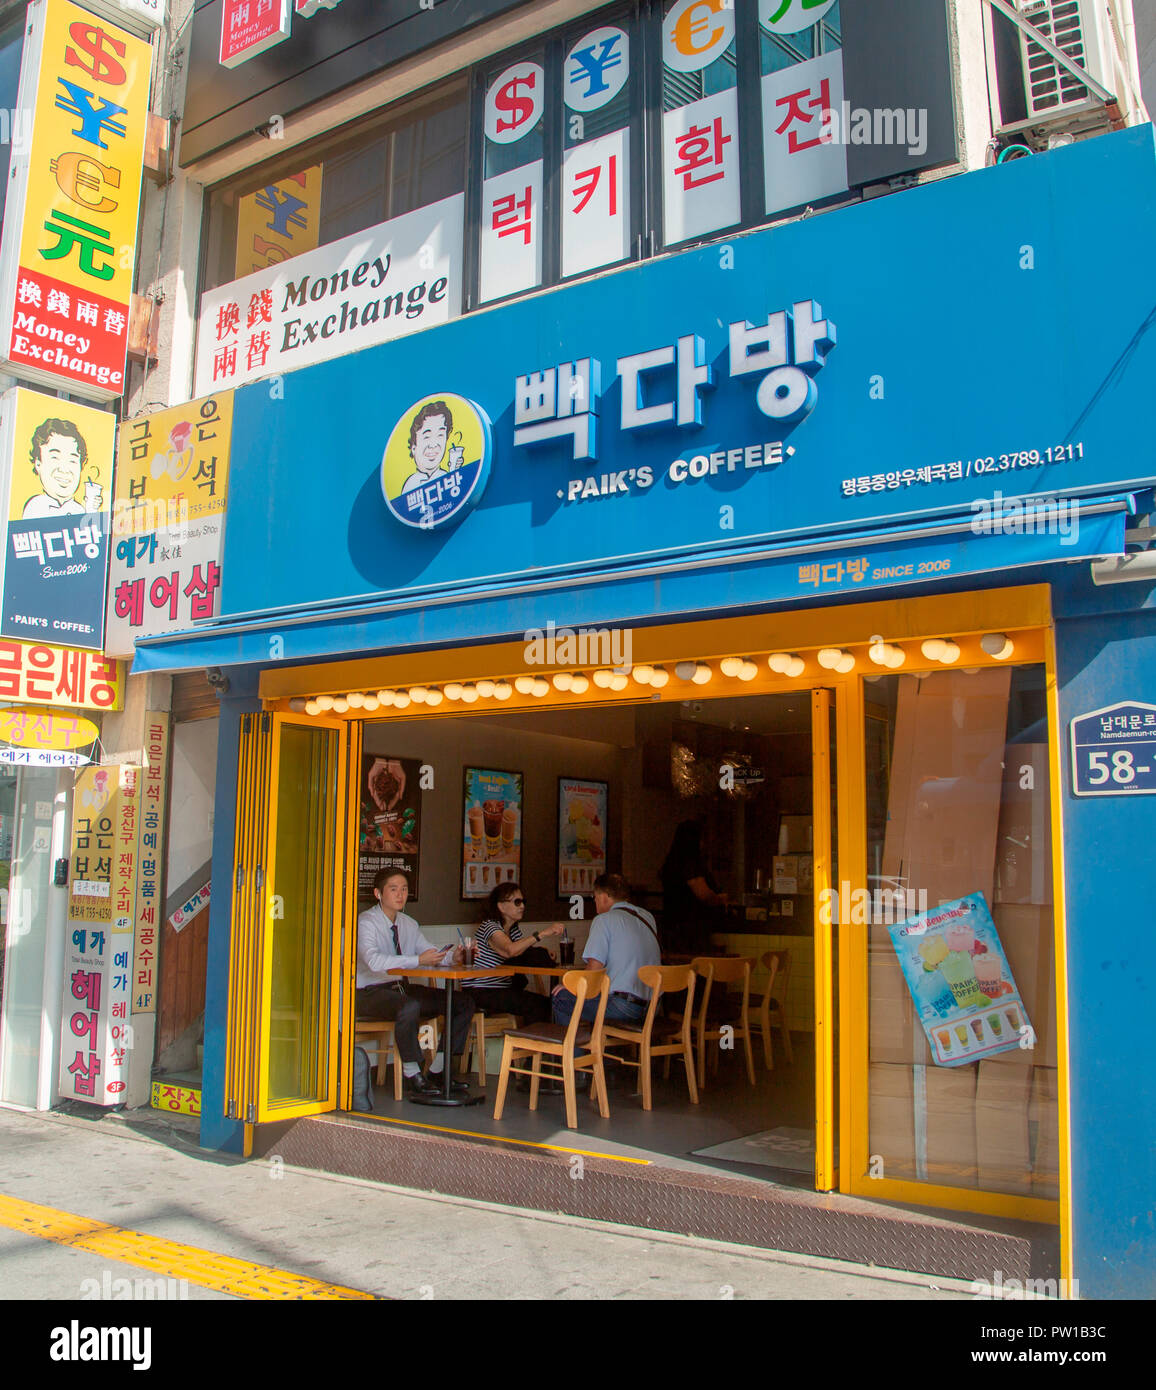 Paik's Coffee, Oct 4, 2018 : A branch of Paik's Coffee, one of major low-priced coffee drink retailers in South Korea, is seen at Myeongdong in central Seoul, South Korea. Paik's Coffee is headed by CEO Paik Jong-Won of parent company The Born Korea. Chef-entrepreneur Paik Jong-Won became a public figure after marrying famous actress So Yoo-Jin in 2013 as he has since appeared in many local TV shows. Credit: Lee Jae-Won/AFLO/Alamy Live News Stock Photo